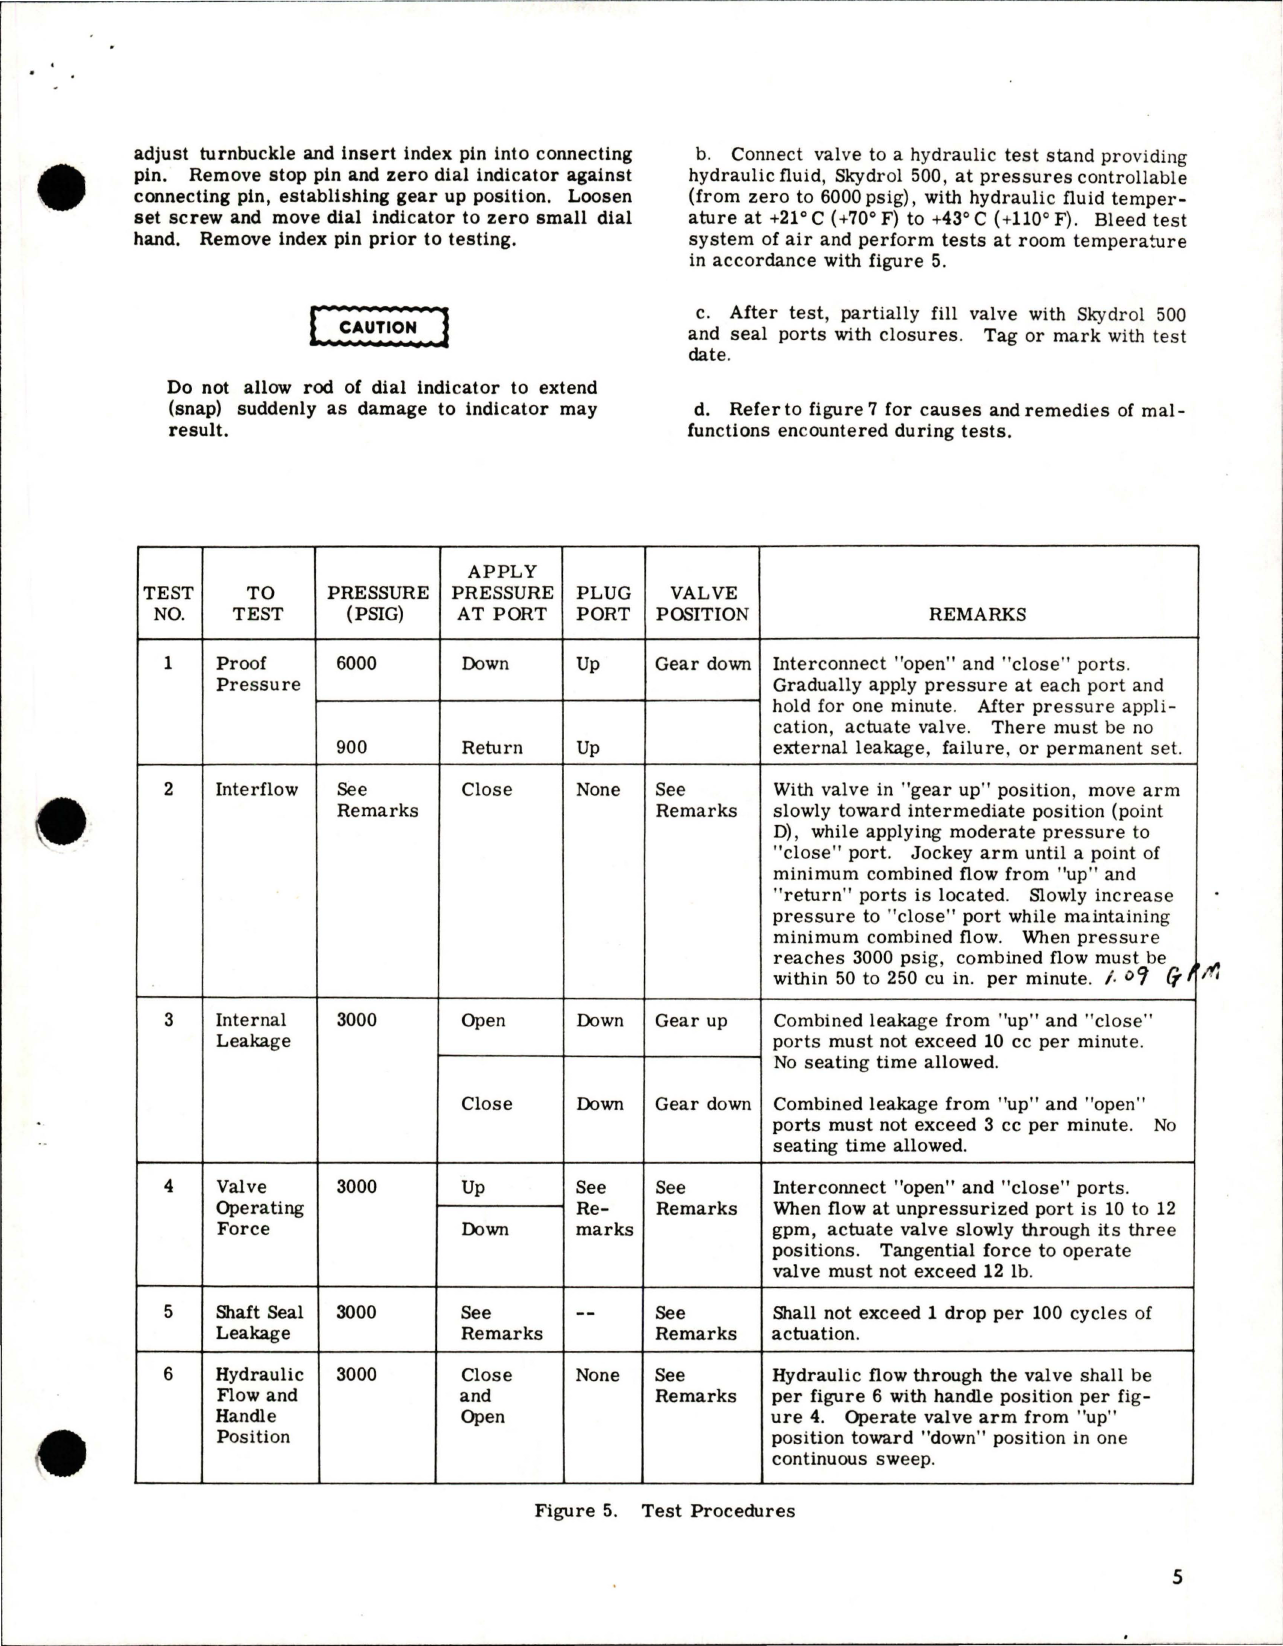 Sample page 5 from AirCorps Library document: Overhaul Manual with Parts for Landing Gear Door Control Valve Assembly - Parts S-3450-61 and S-3450-71